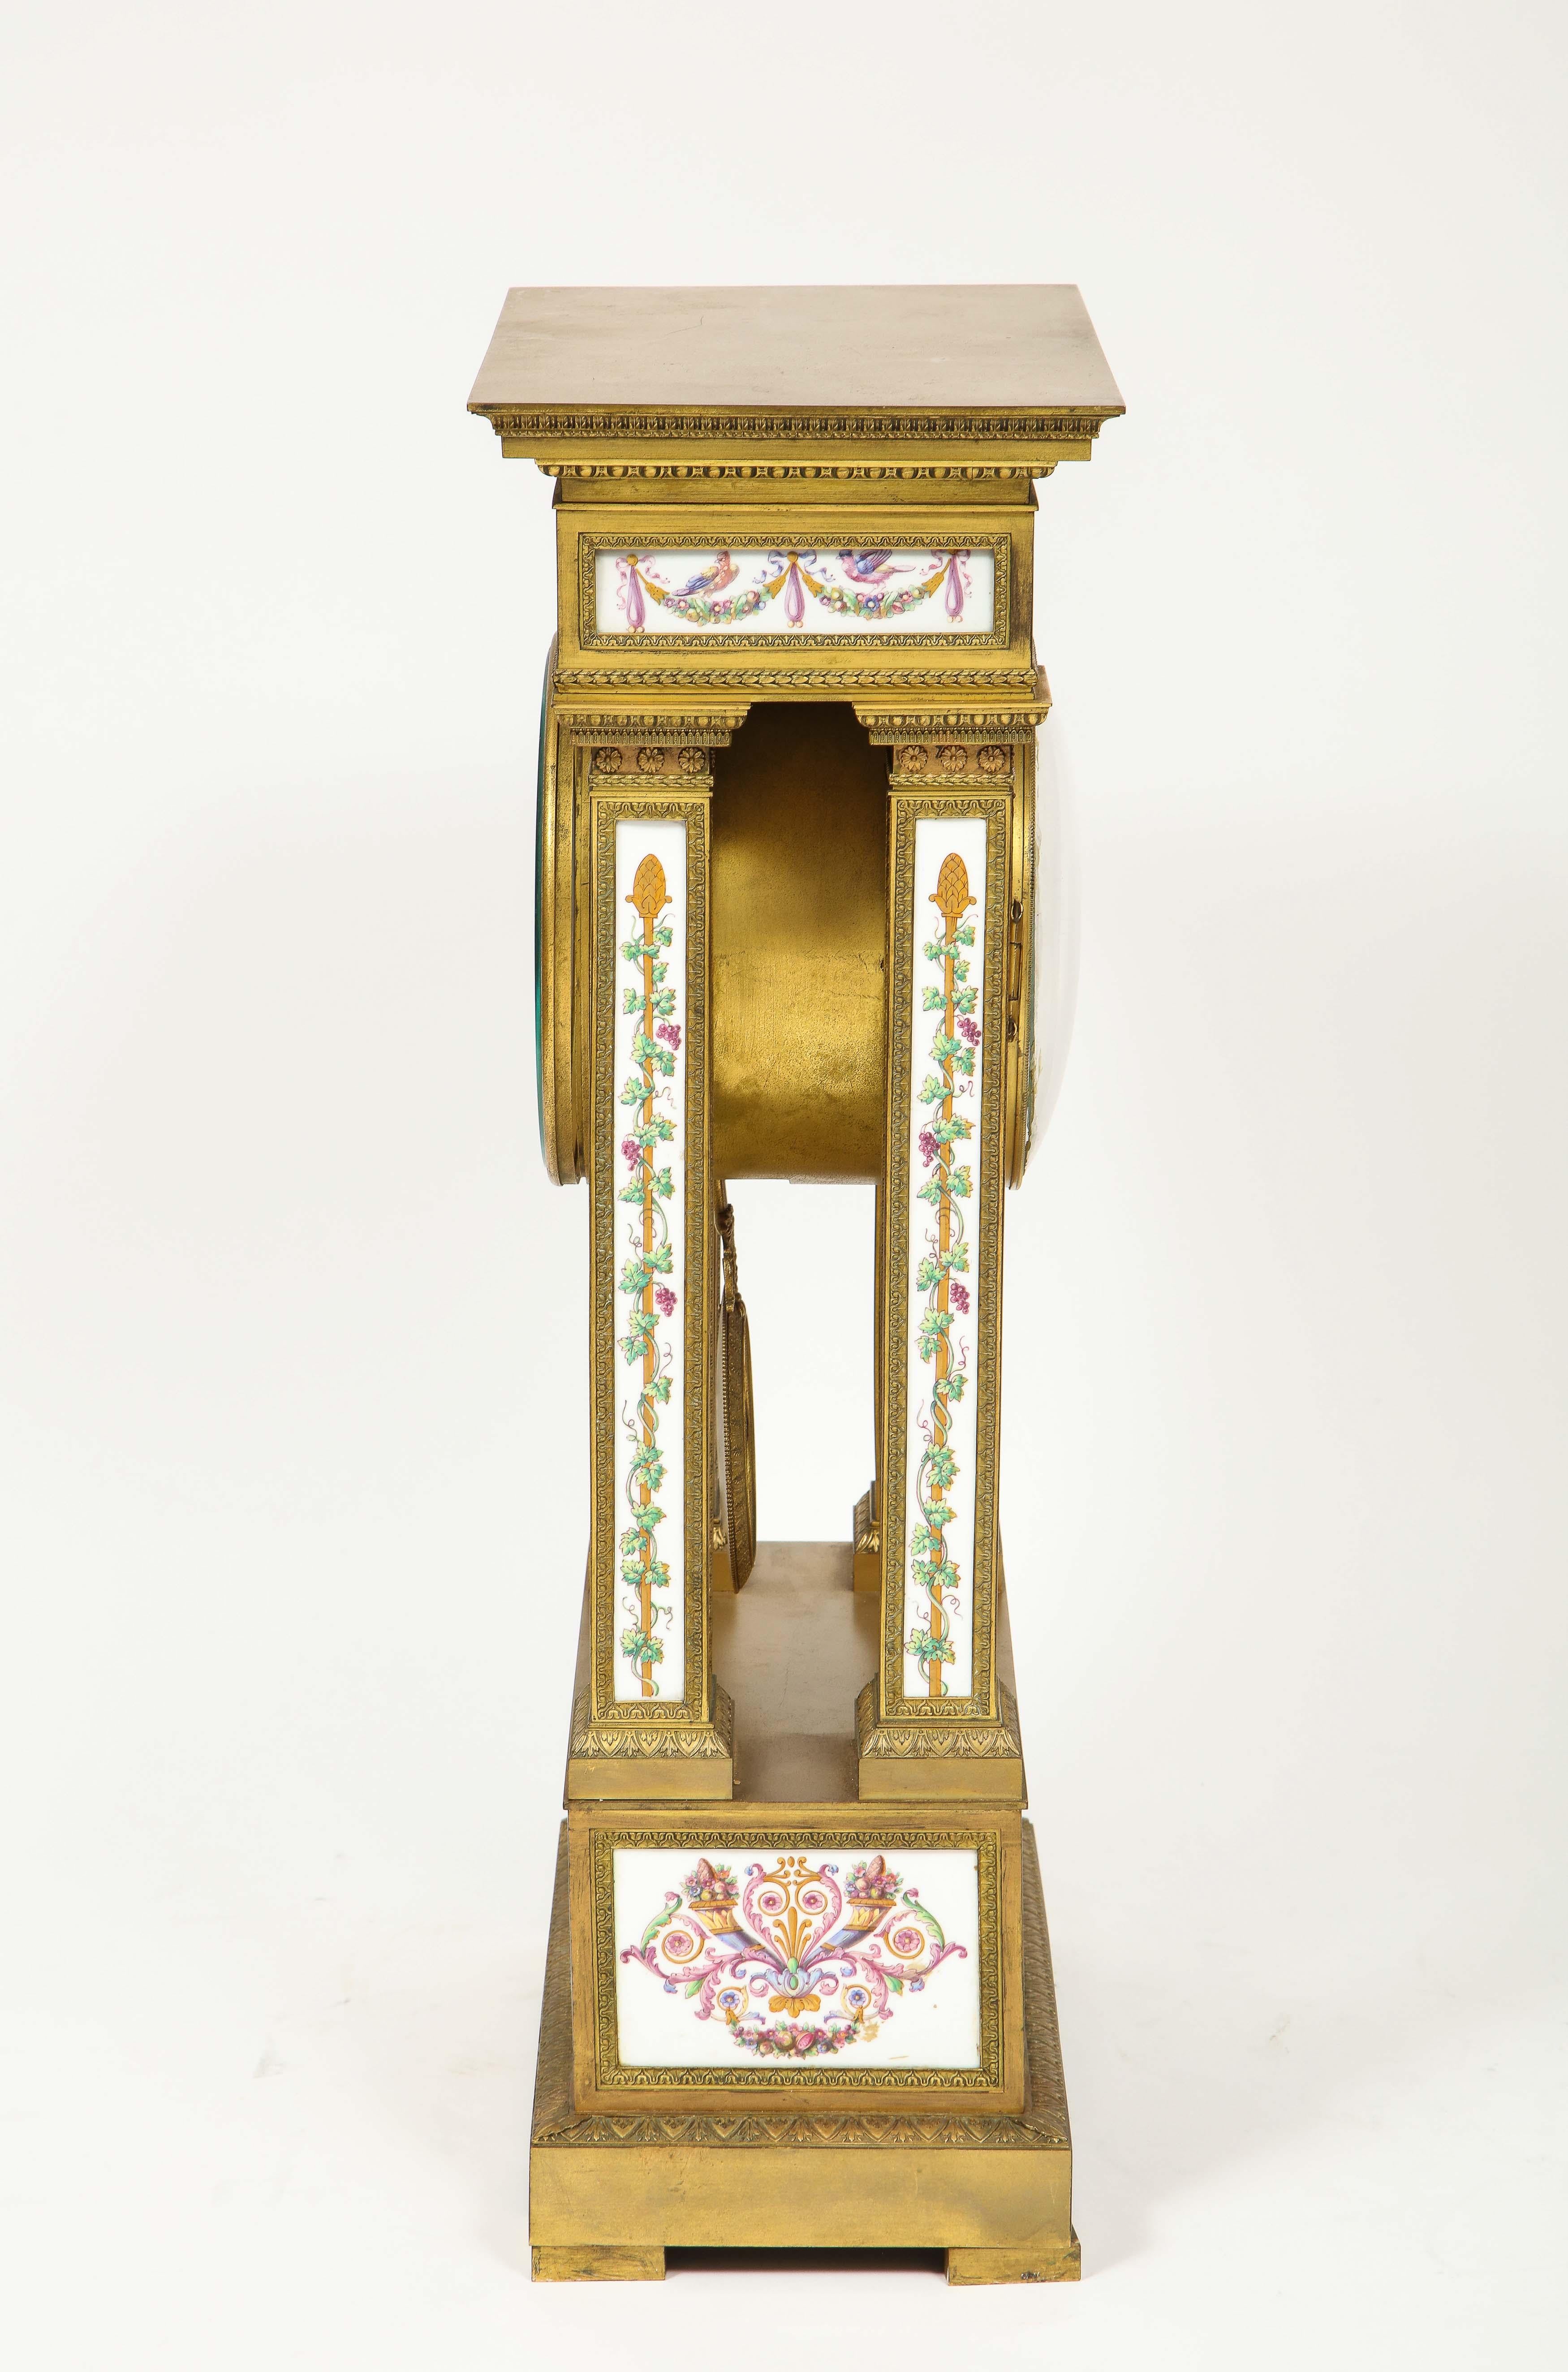 A Rare and Exquisite French Ormolu and Porcelain Clock, attributed to Deniere  For Sale 8